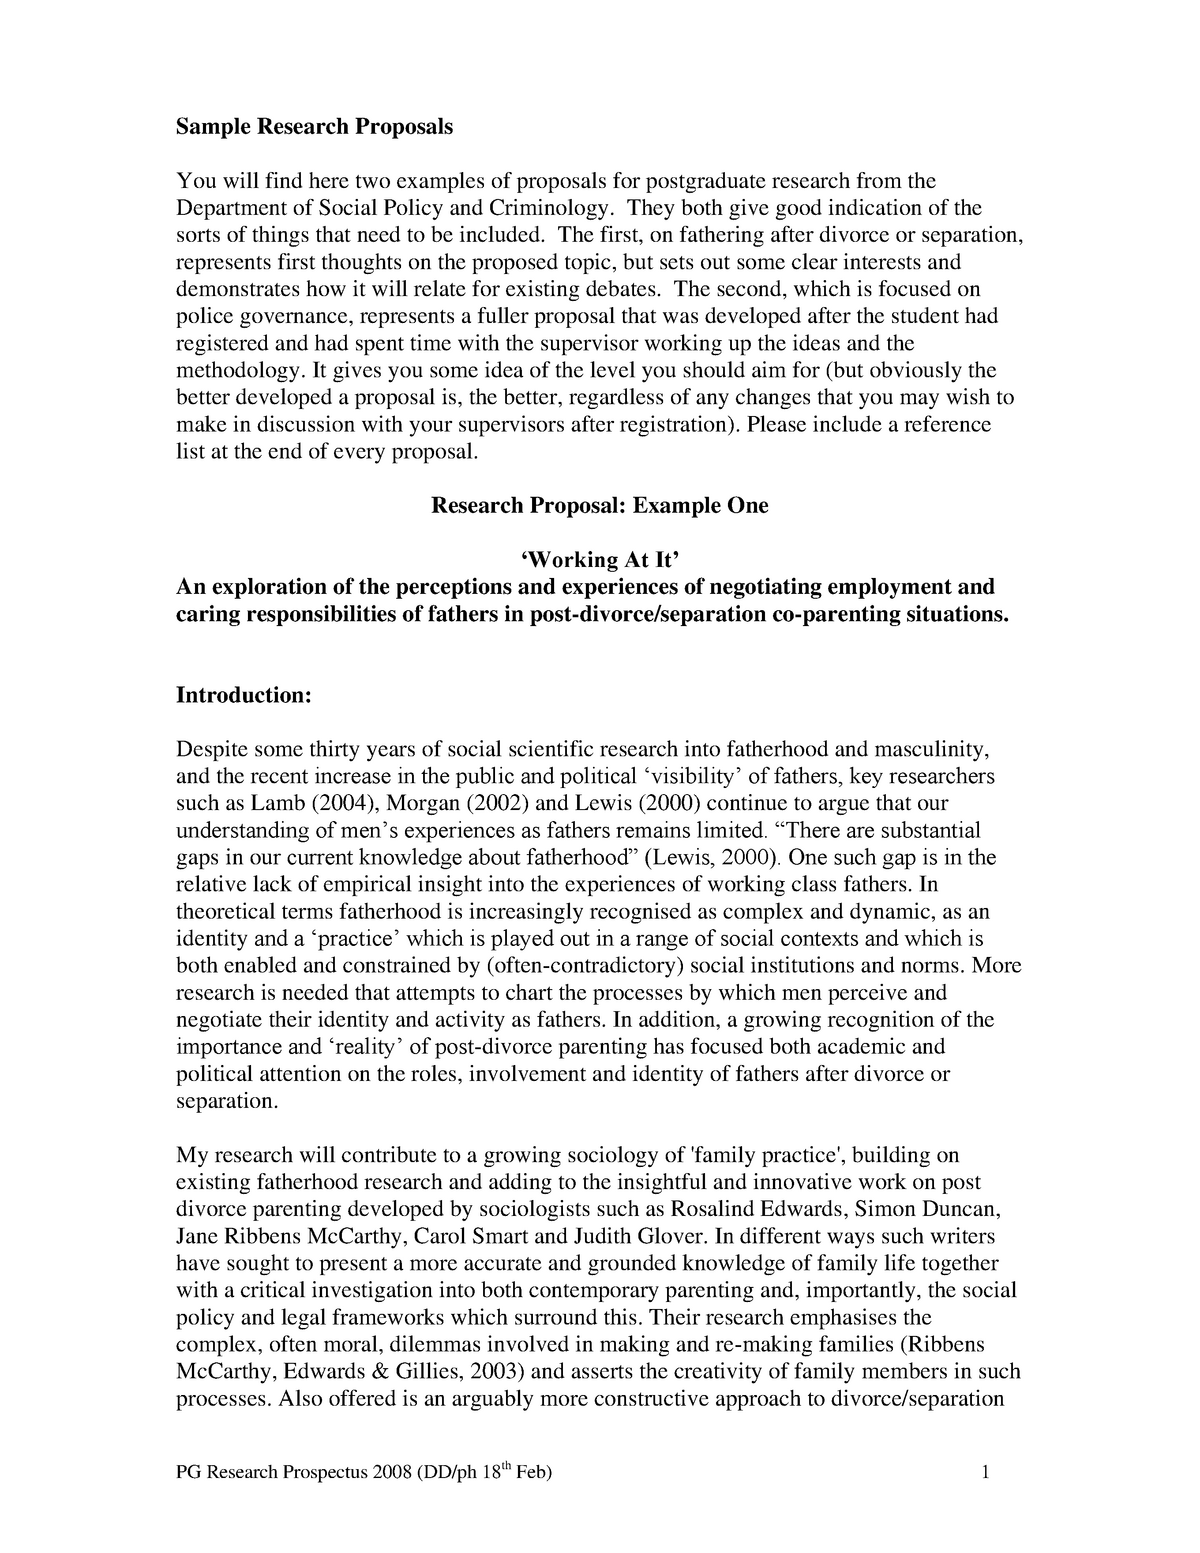 example of a qualitative psychology research proposal